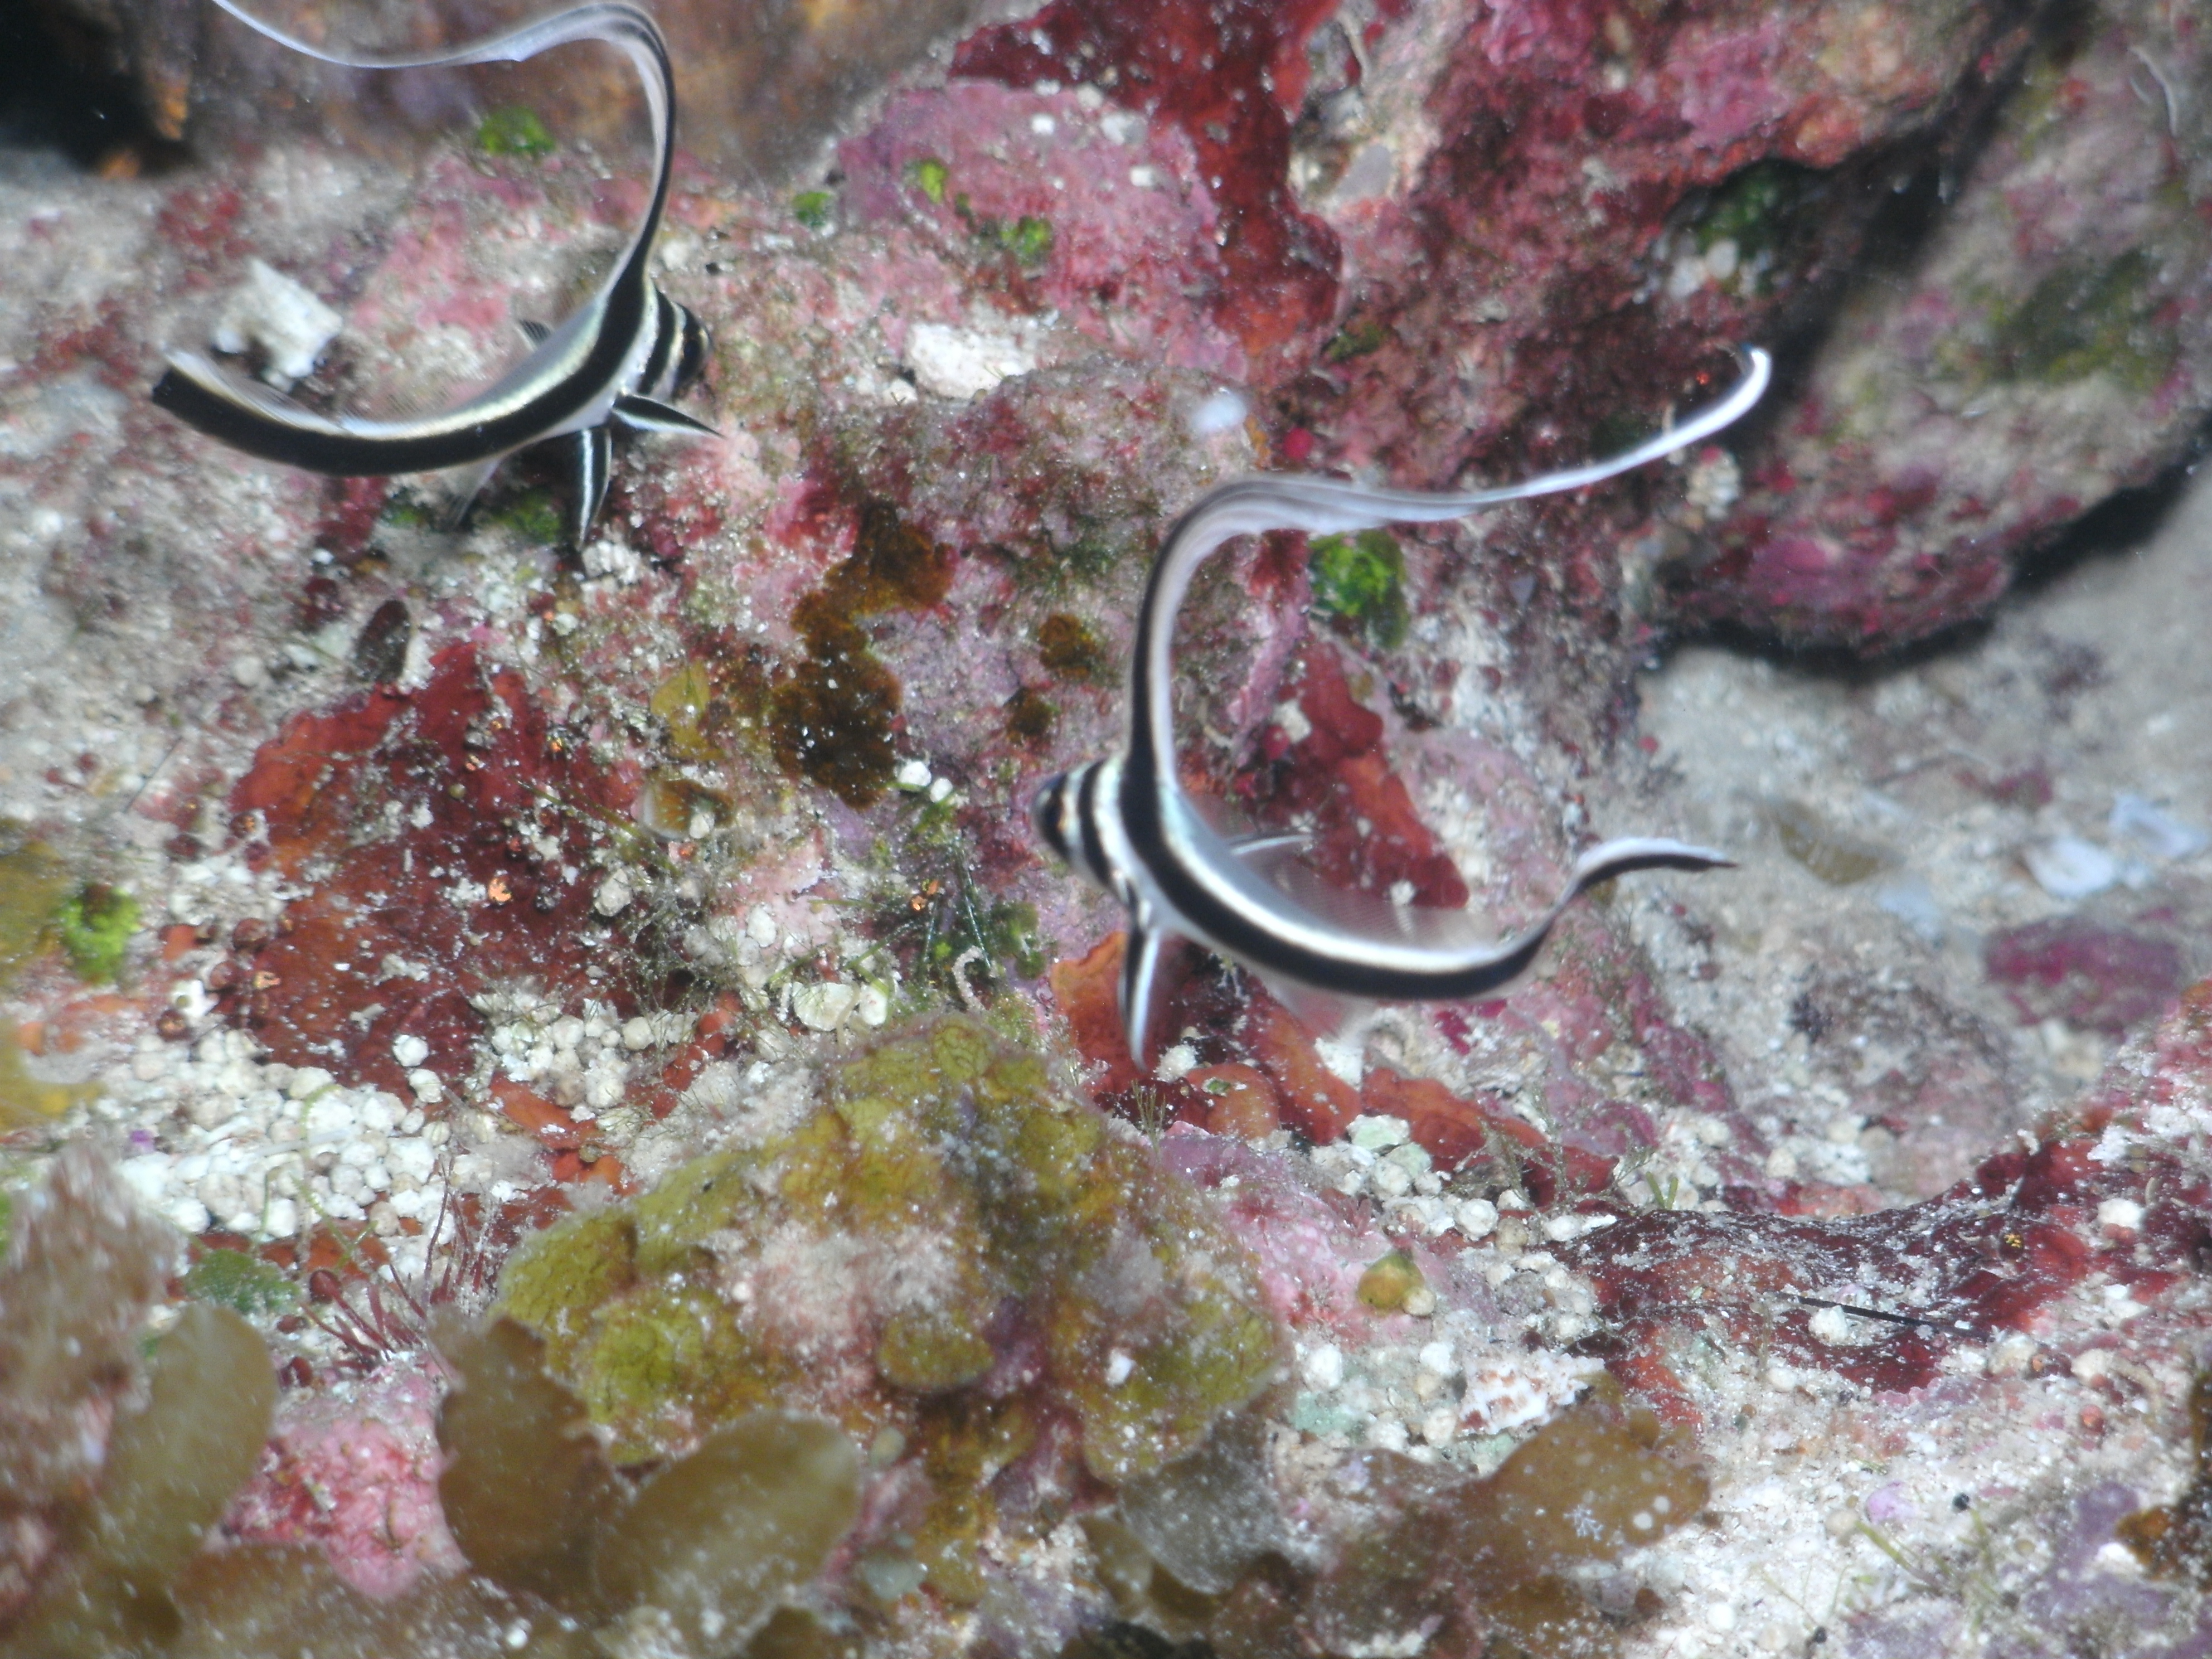 Two Juvenile Spotted Drum (May 8, 2012)